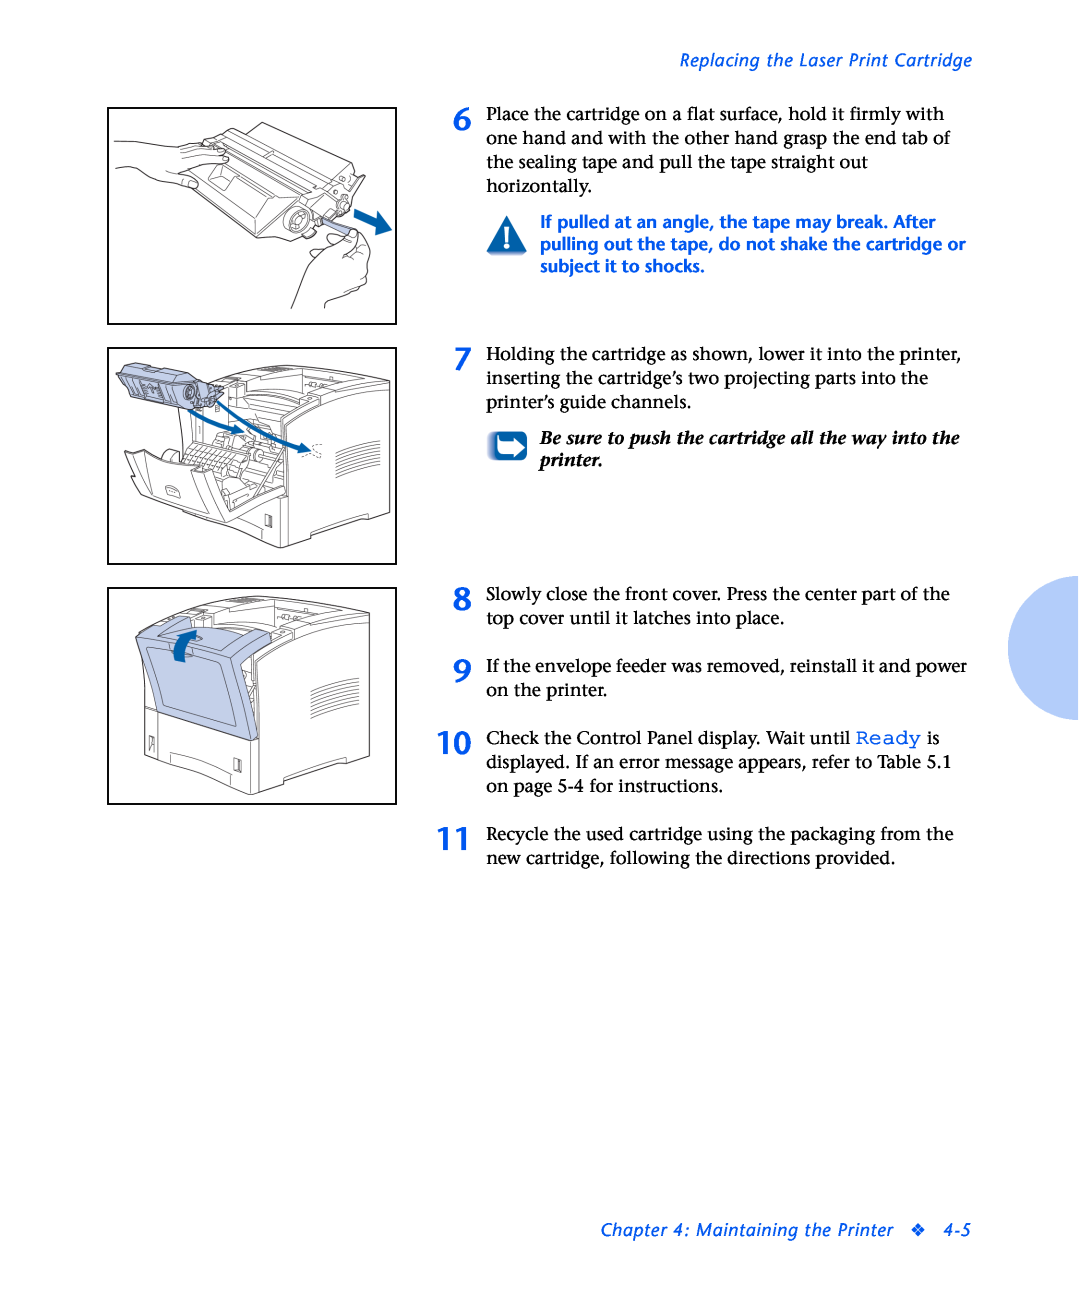 Xerox N2125 manual Replacing the Laser Print Cartridge, Be sure to push the cartridge all the way into the printer 